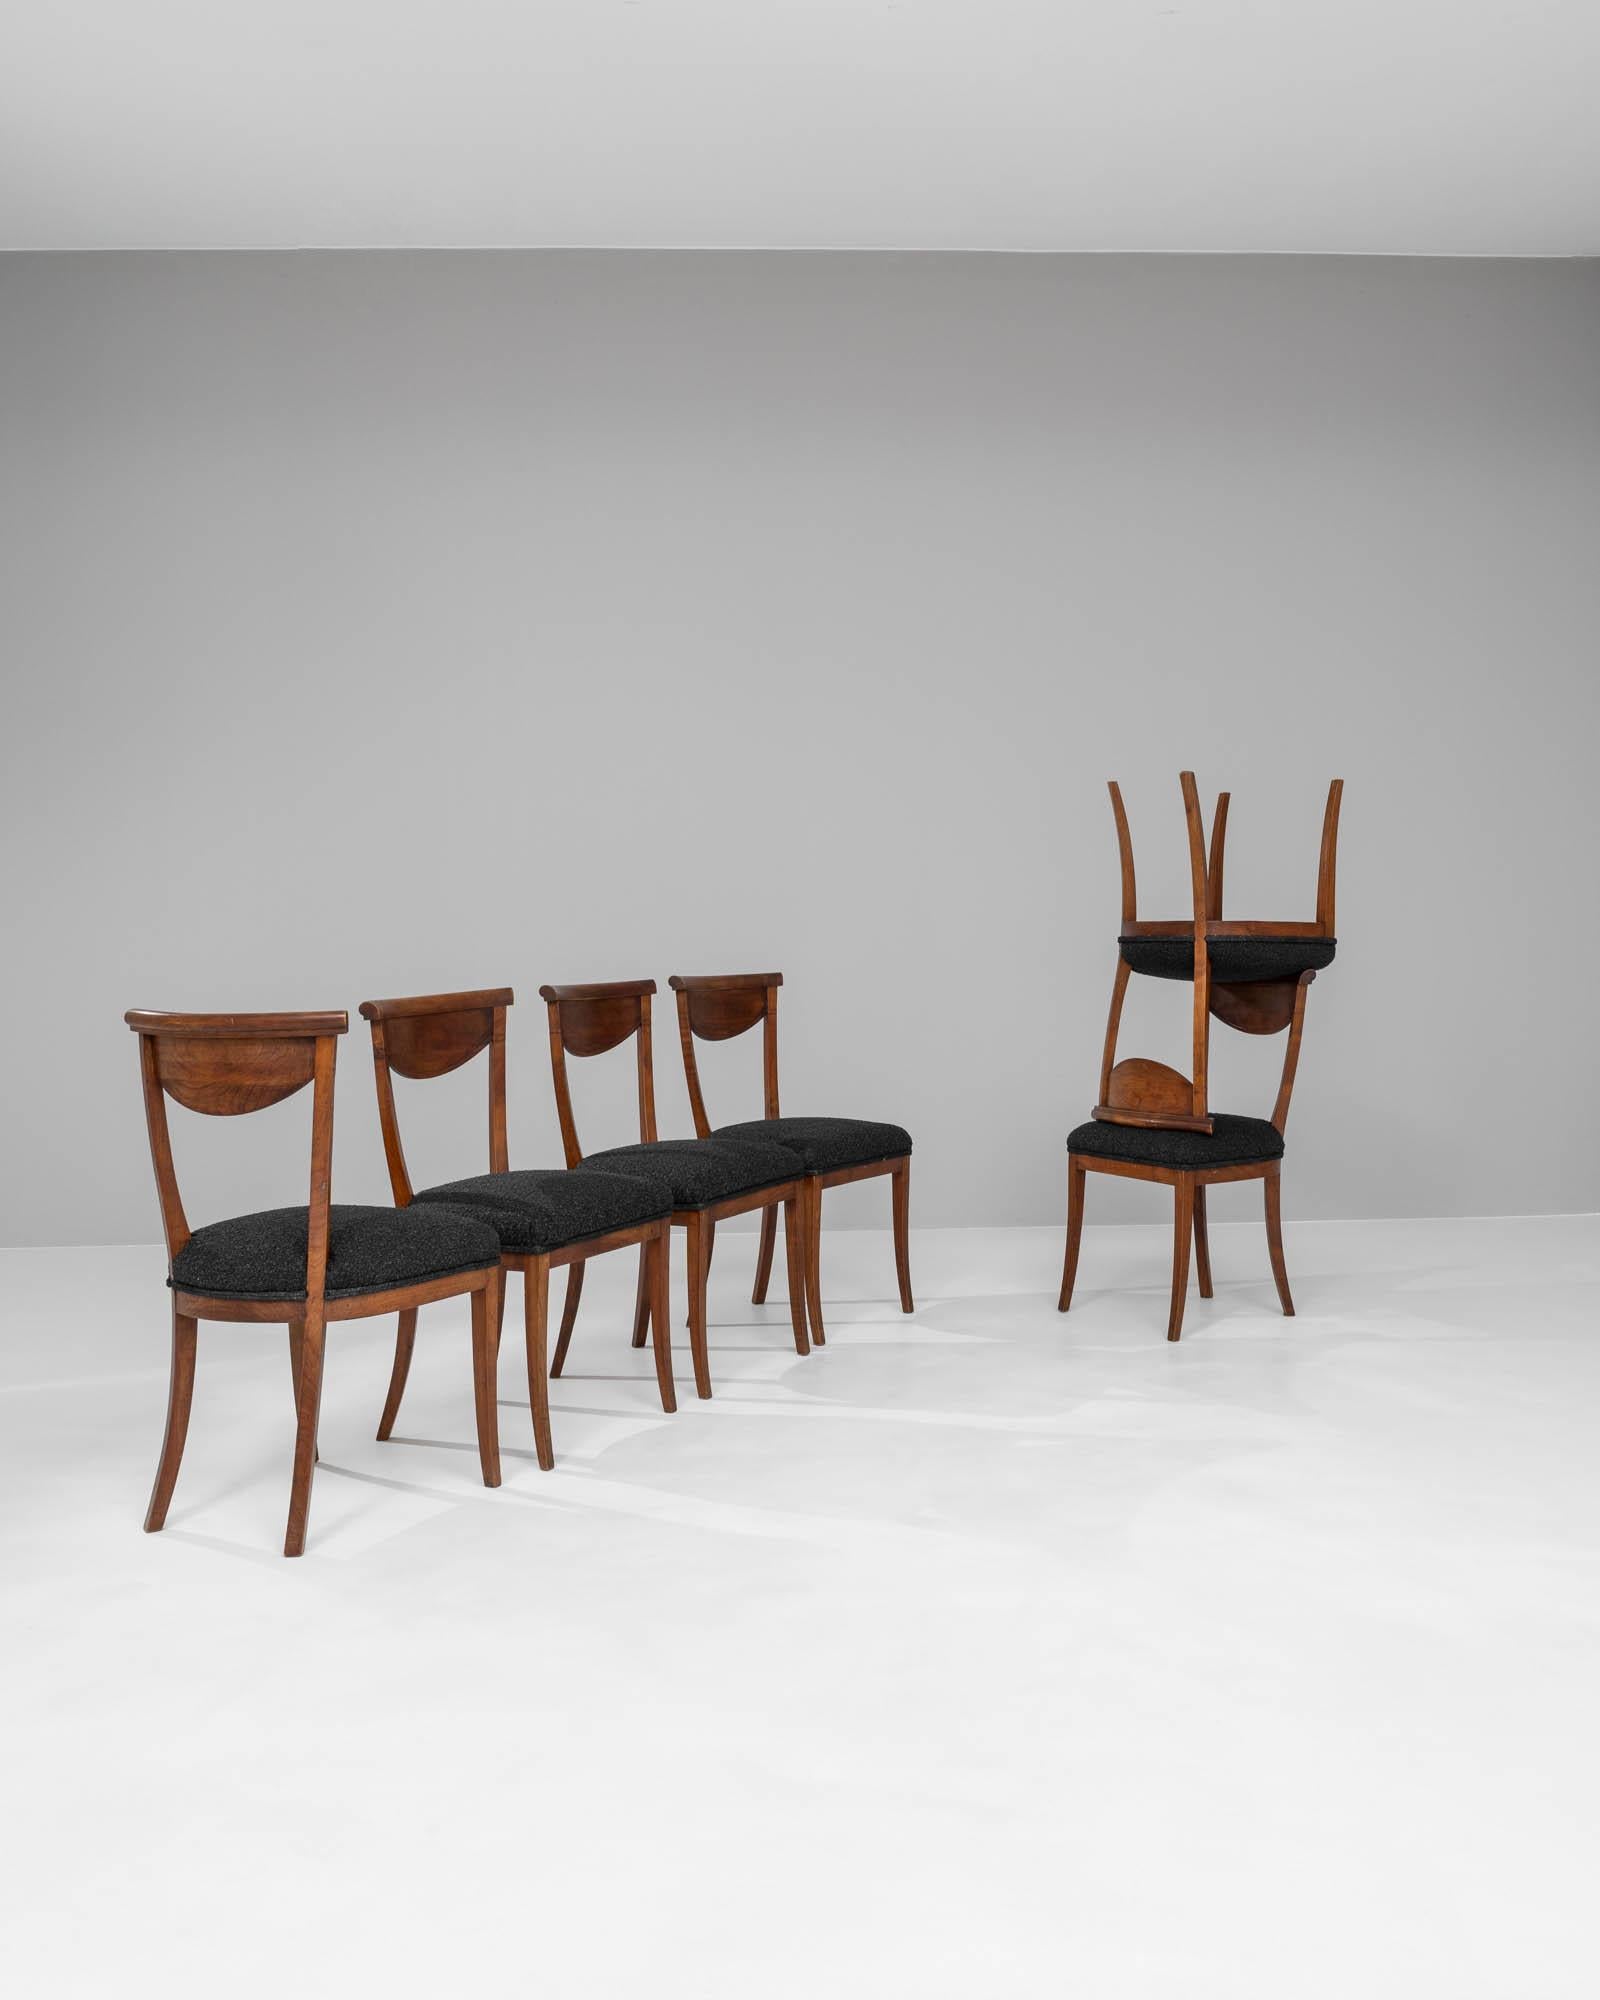 19th Century French Wooden Dining Chairs With Upholstered Seats, Set of 6 For Sale 1